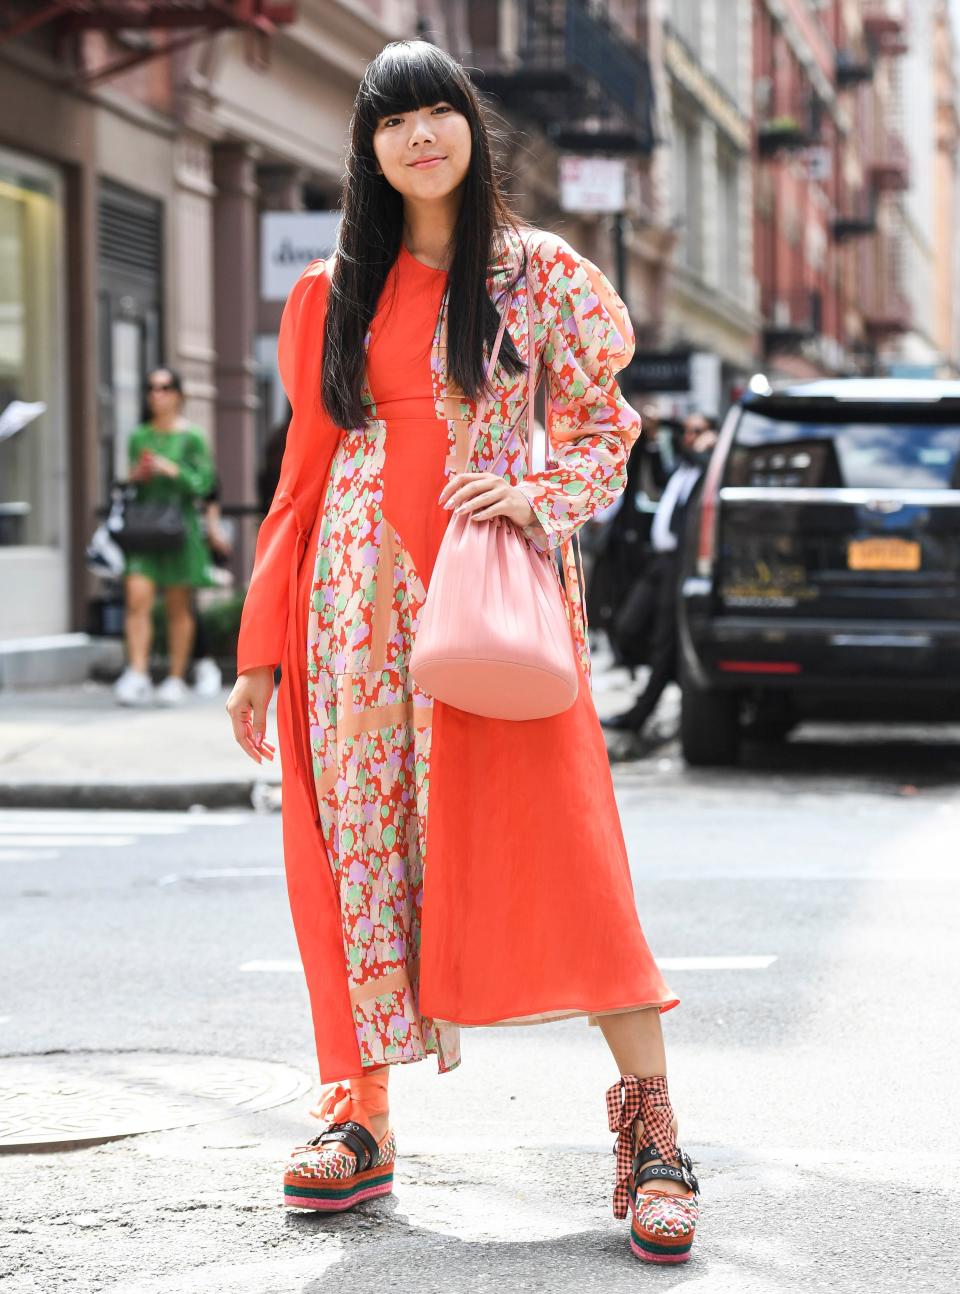 Puffed sleeves, bright colors, floral prints, flatform shoes—you really can have it all.